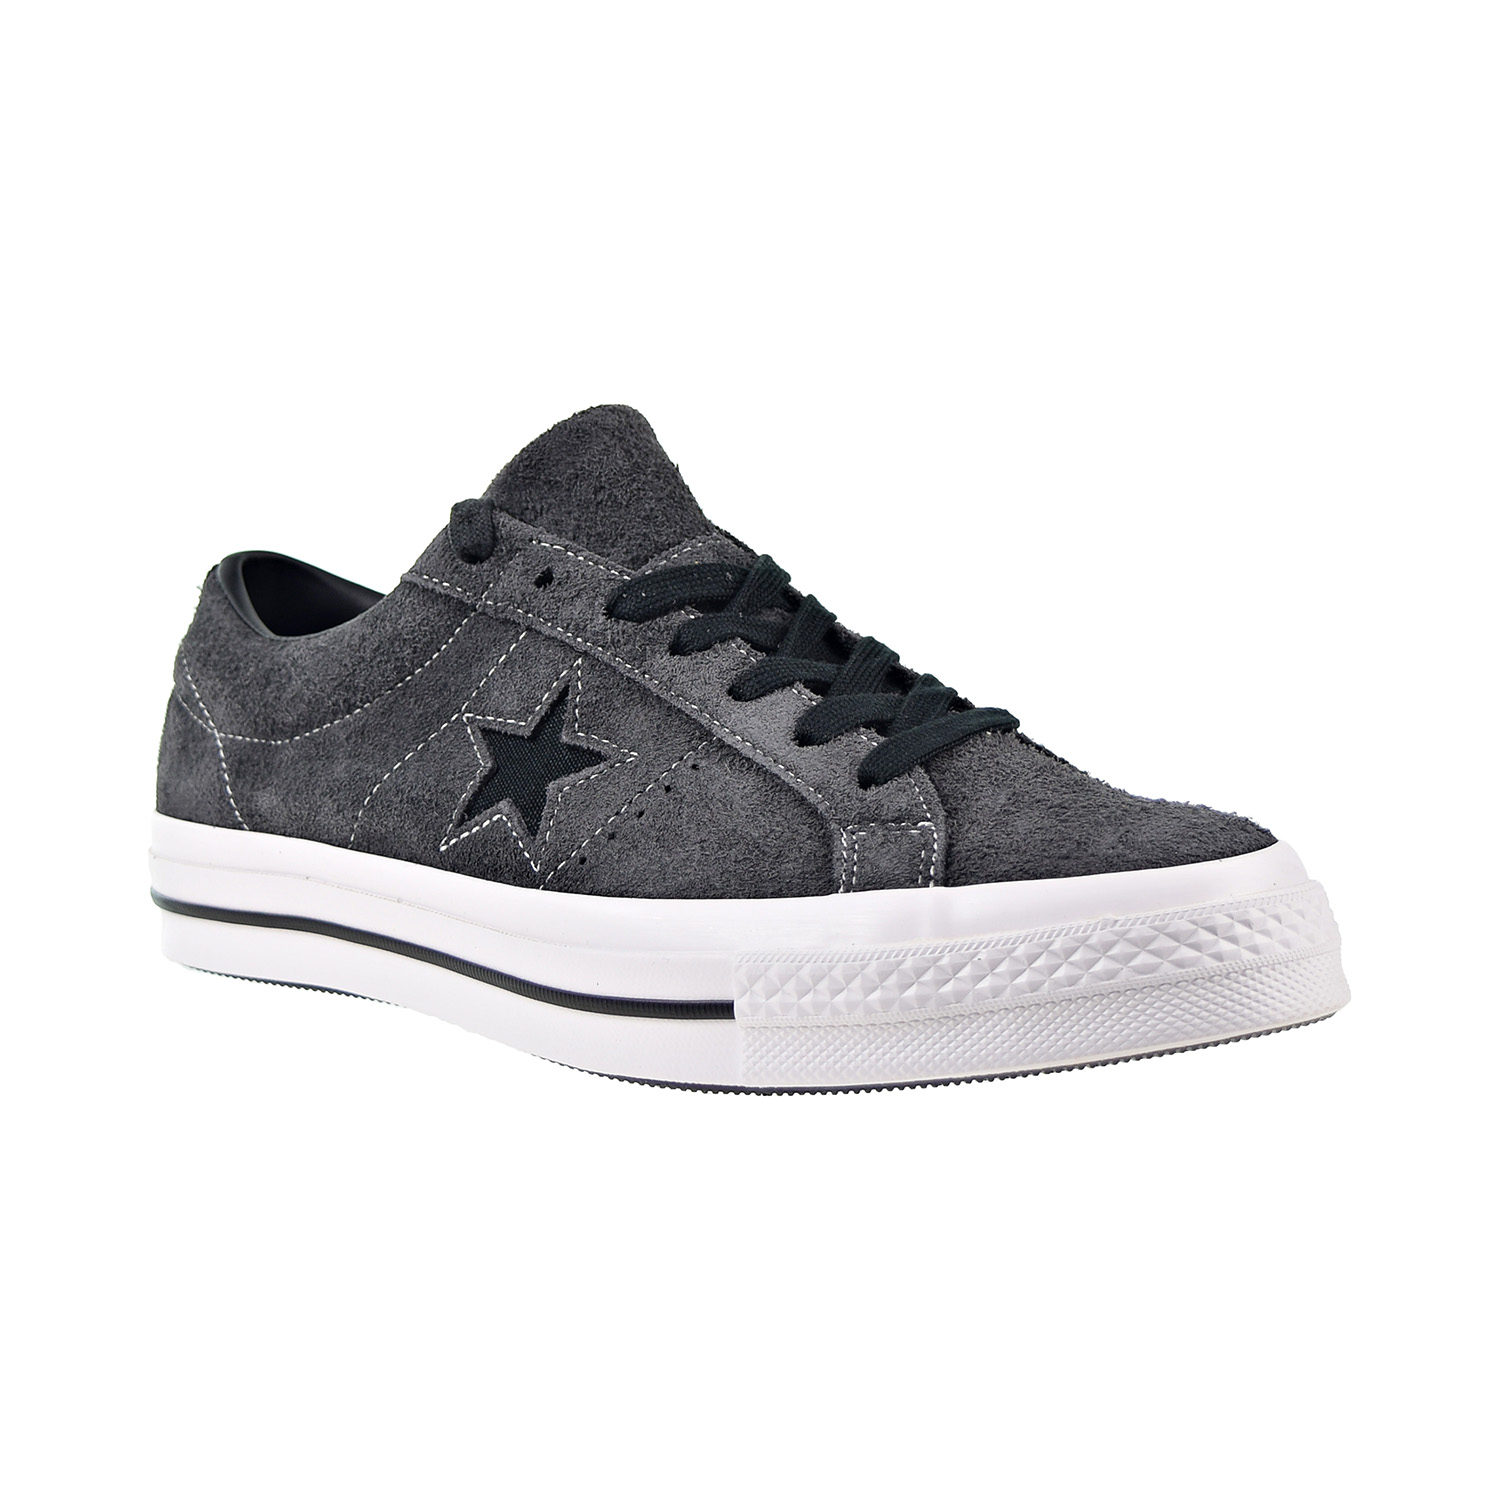 Converse One Star Ox Men's Shoes Almost Black-Black-White 163247c - image 3 of 6